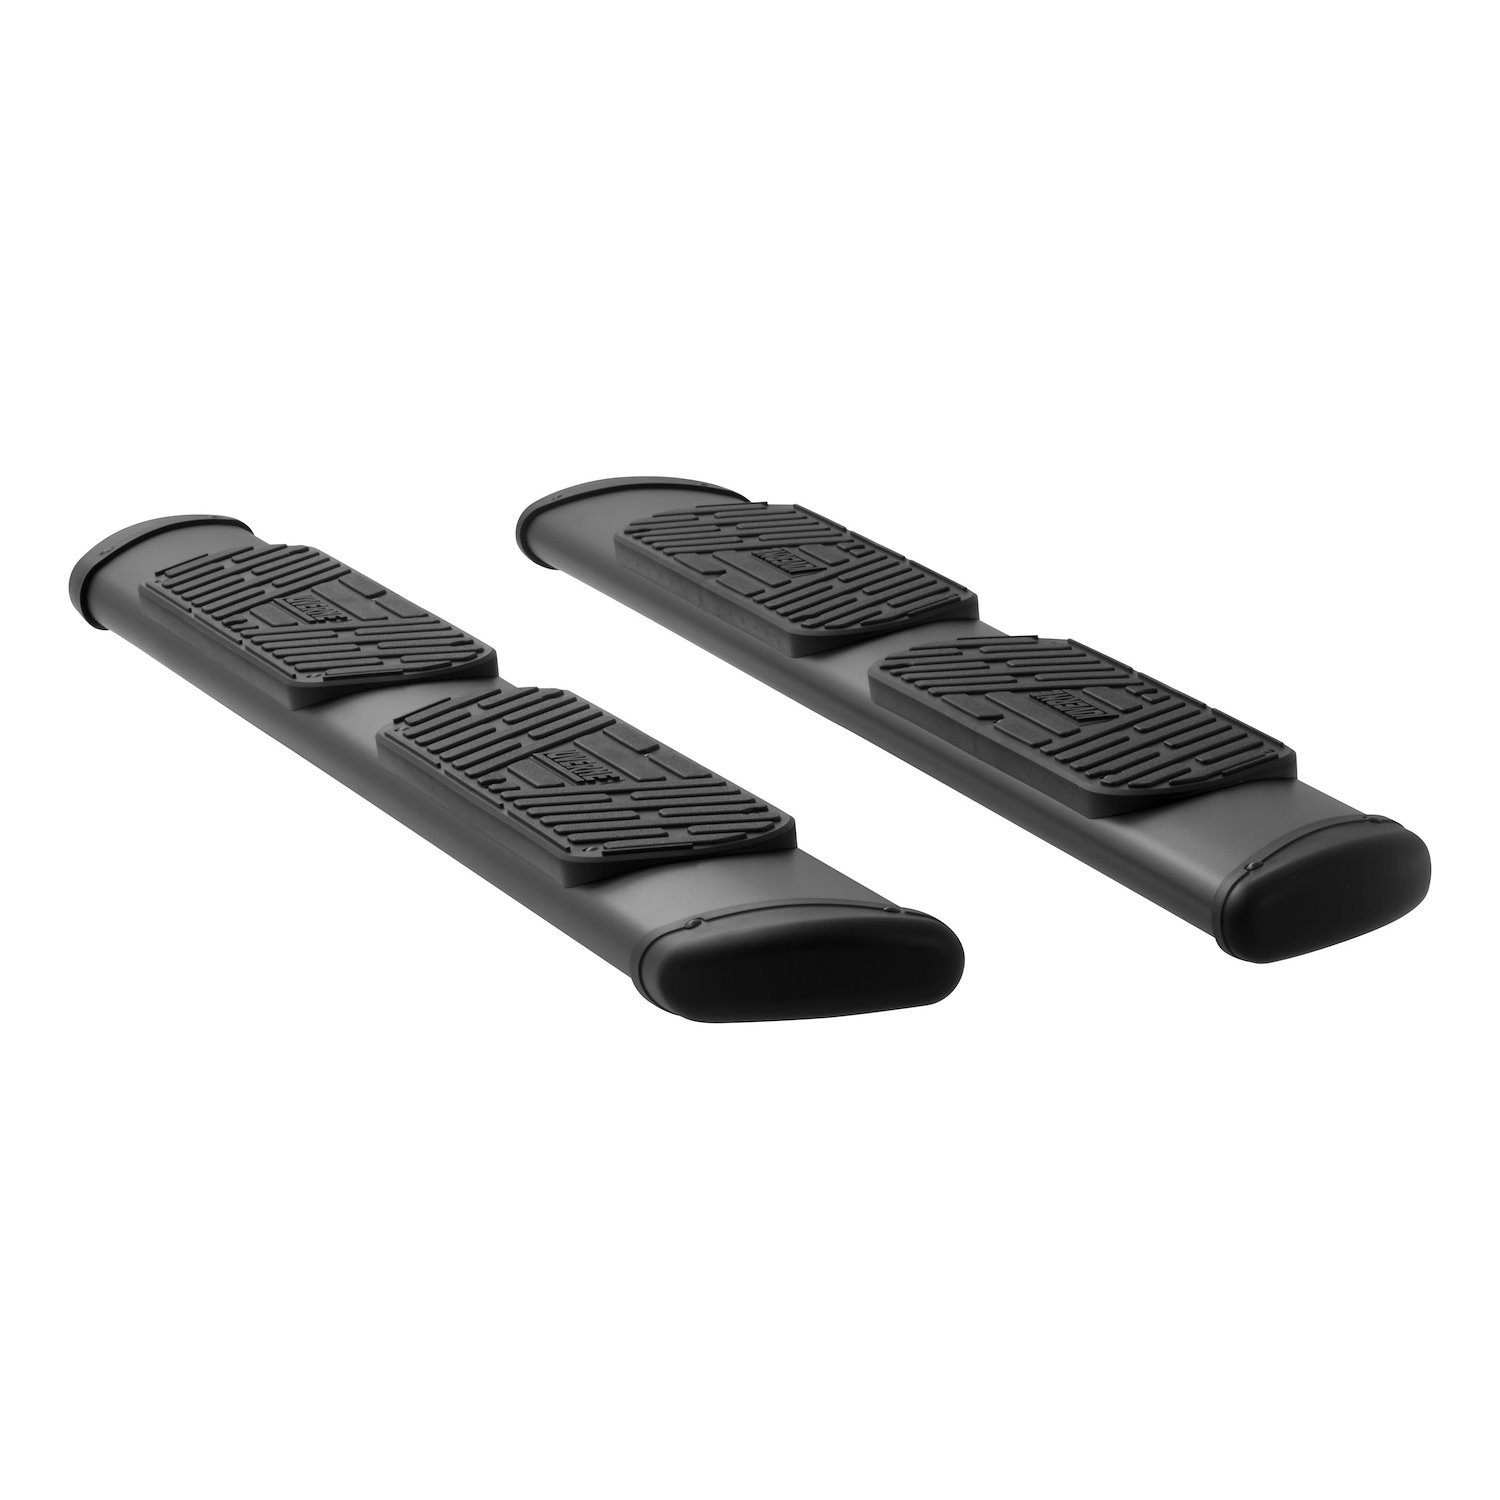 277078-409922 Regal 7 Black Stainless 78 in. Oval Side Steps Fits Select Ford F250, F350, F450, F550